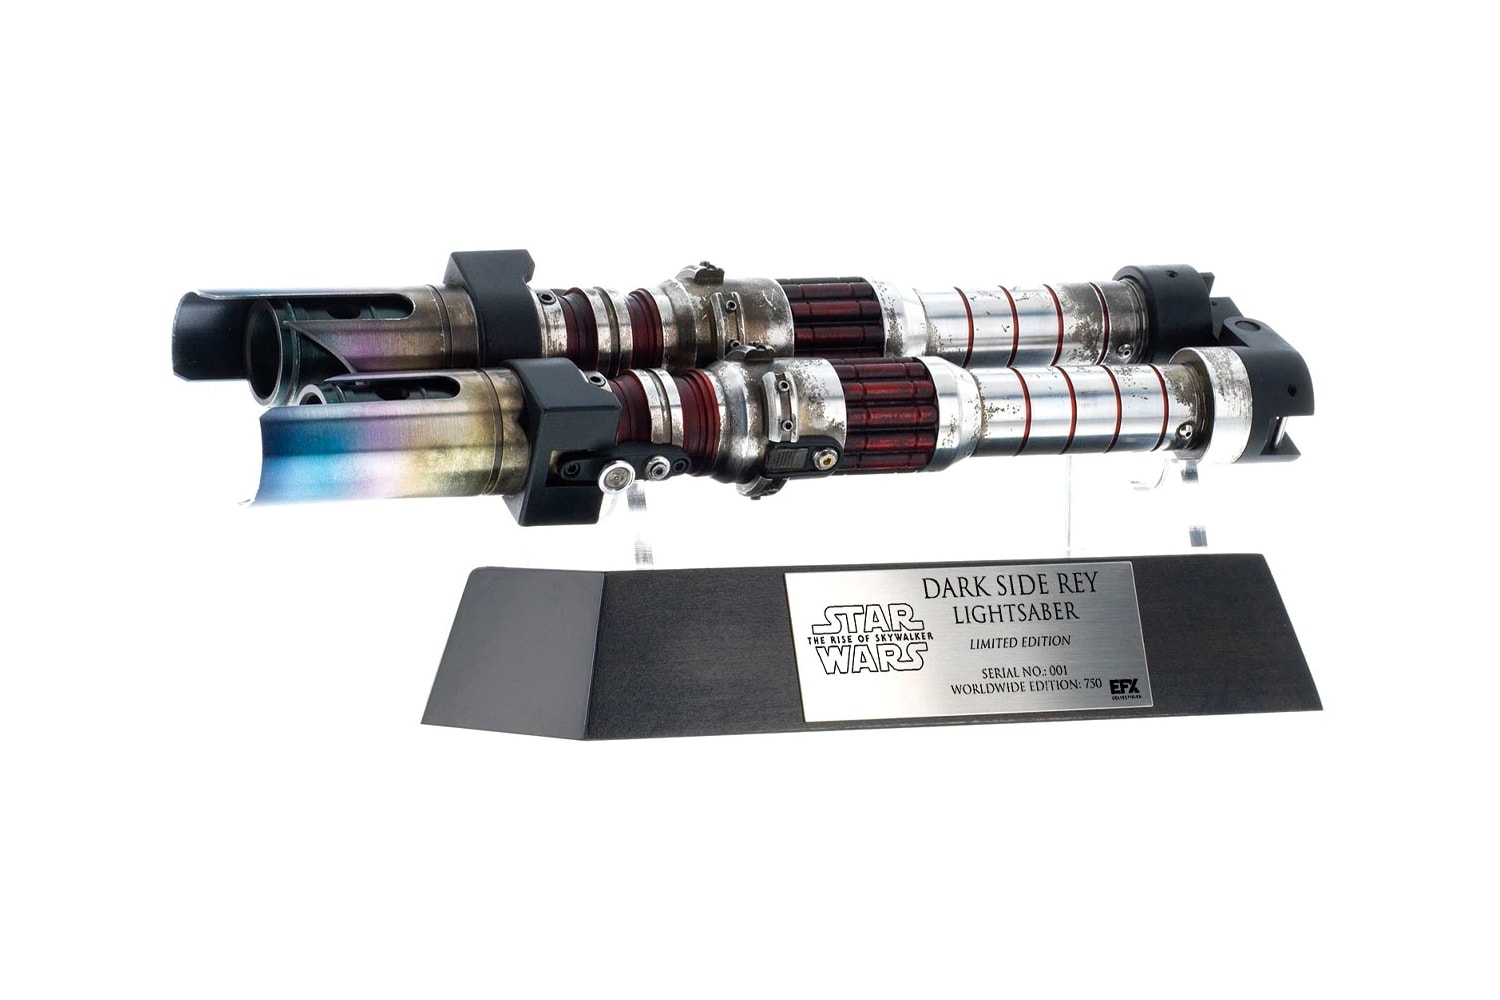 EFX Collectibles Dark Side Rey Lightsaber Star Wars The Rise of Skywalker Replica Release info Date Buy Red Dual Switchblade